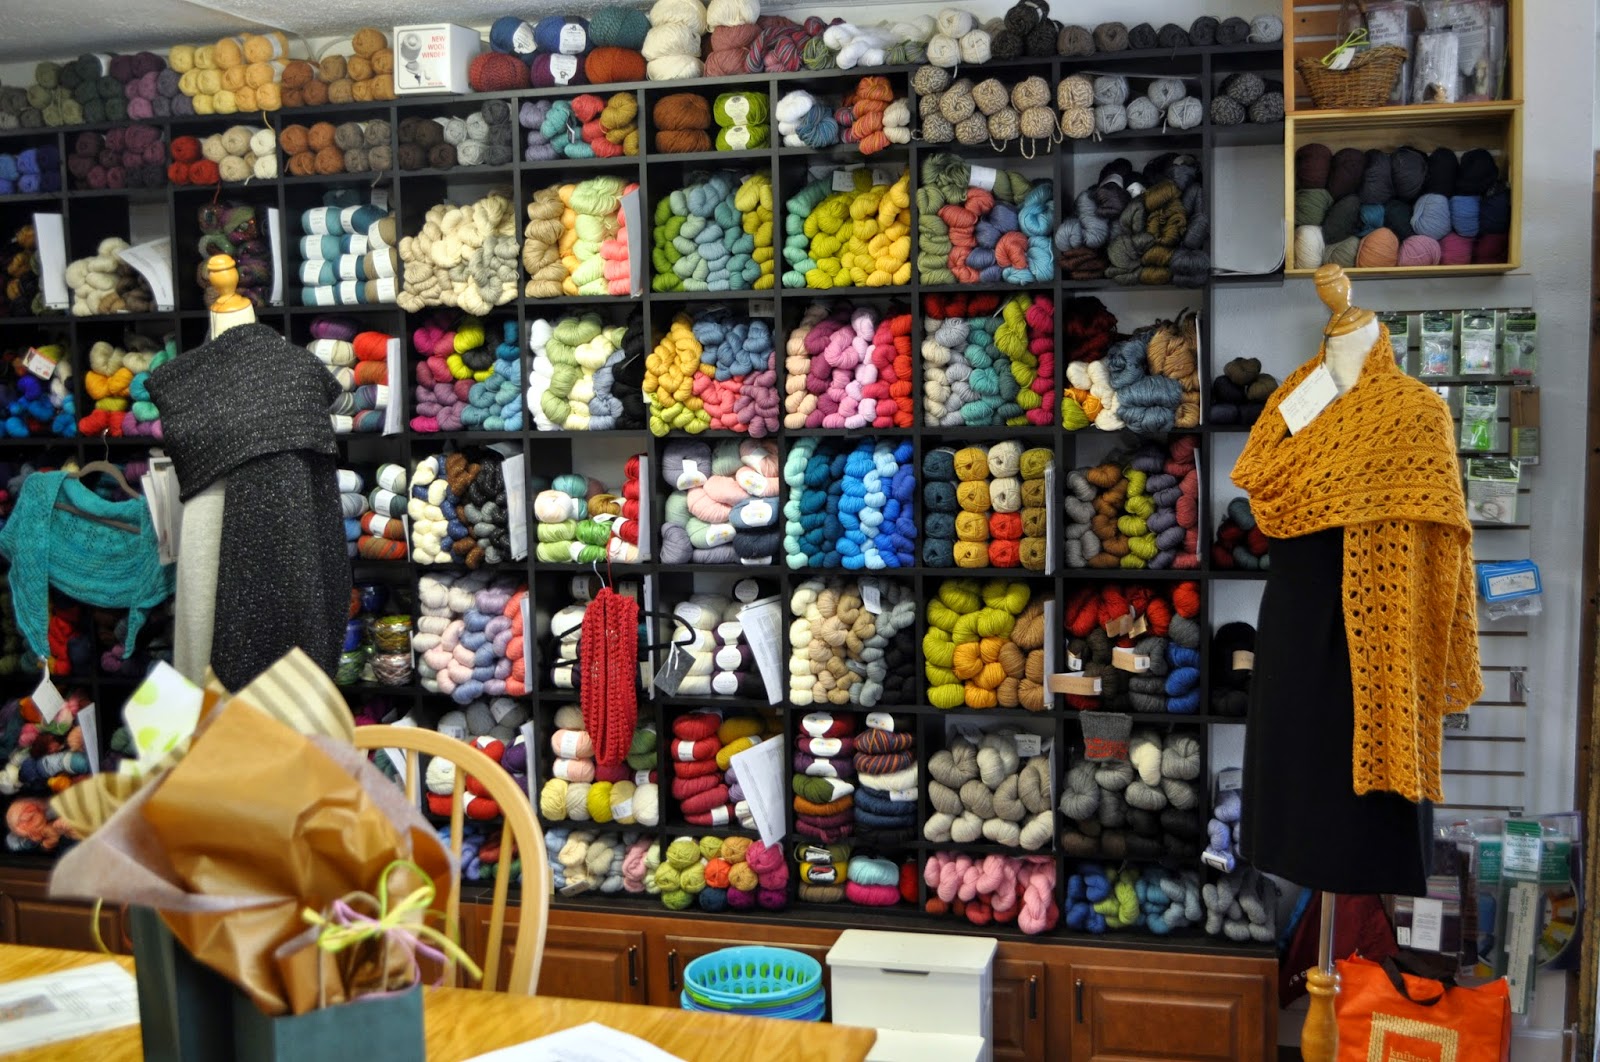 Mereknits: A visit to the alpaca store and a gift